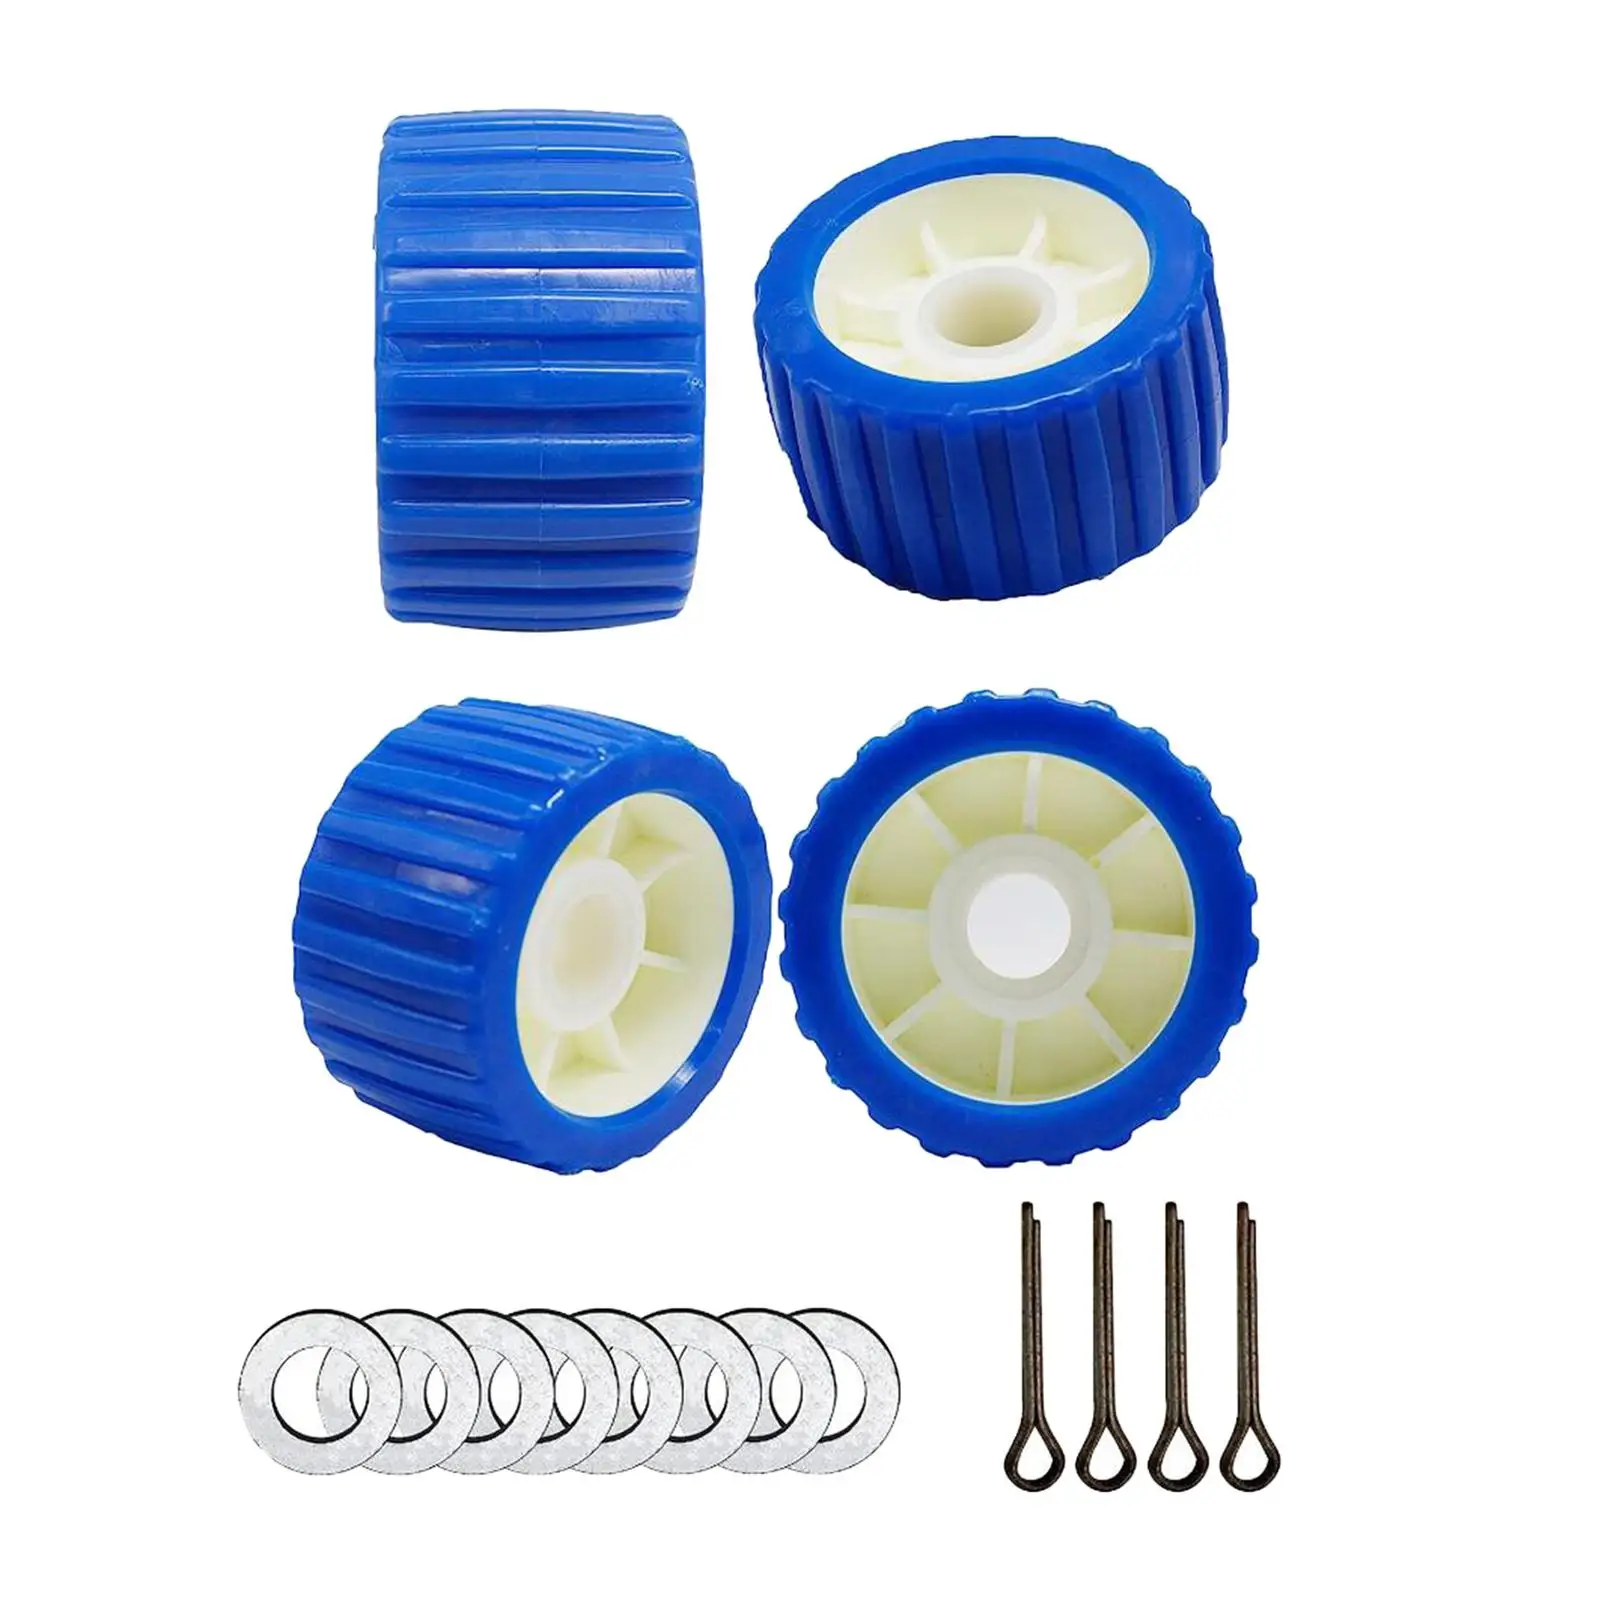 Trailer Roller Universal Plastic Accessory Trailer Parts for Dinghy Rubber Boat Motor Yacht Replace Parts Long Service Life